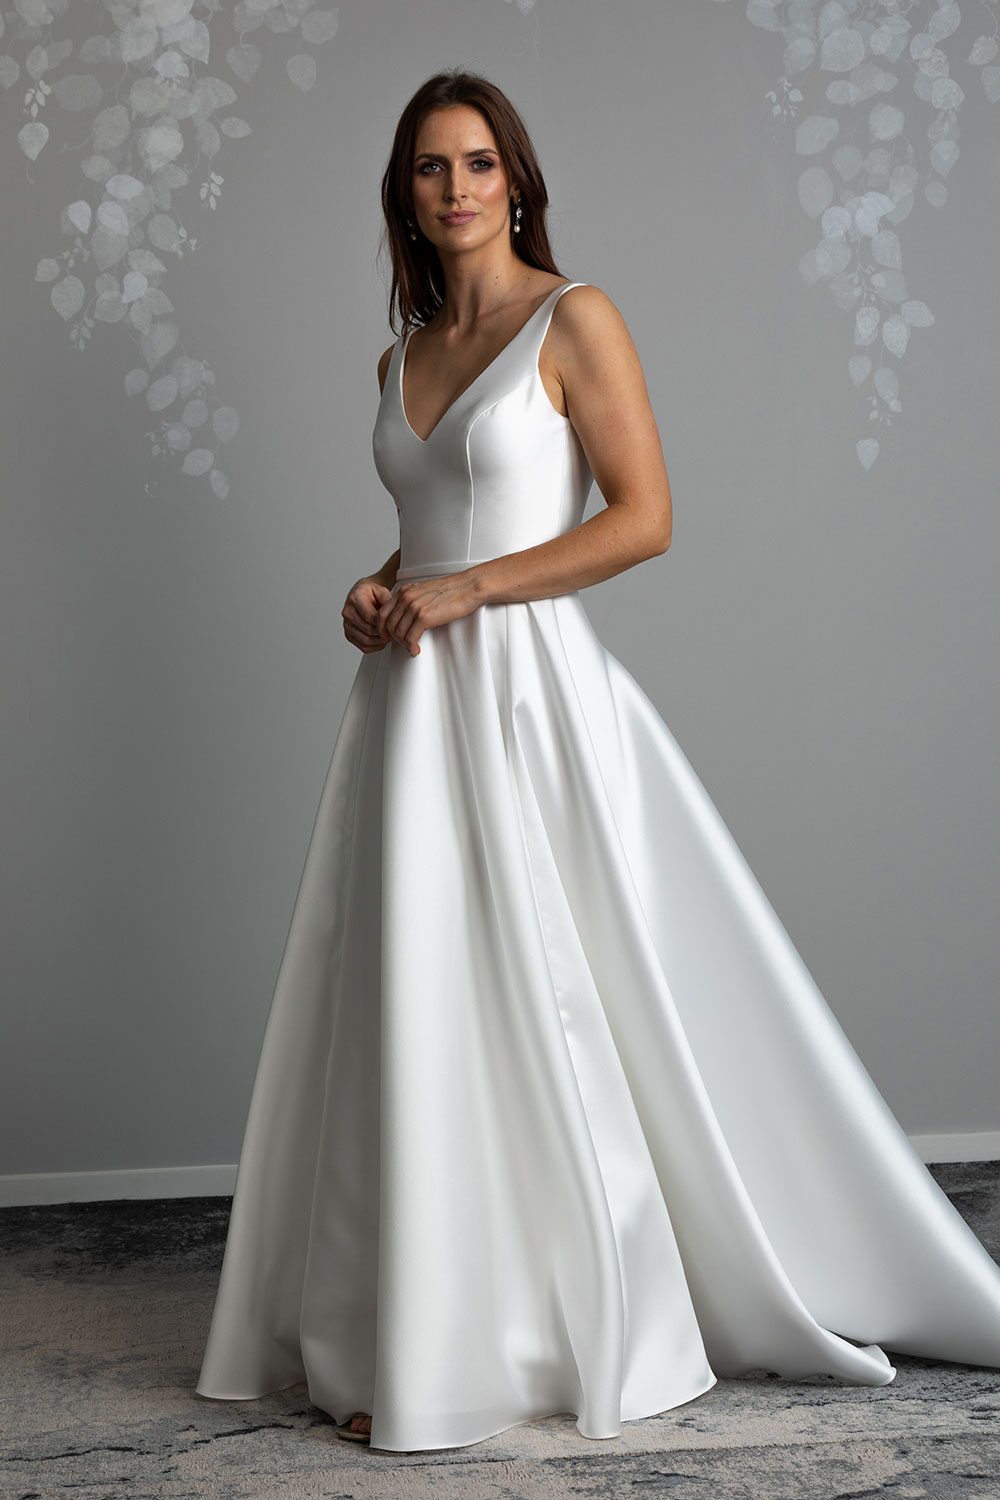 Madison Wedding gown from Vinka Design - This gown is both classic and contemporary, made beautifully with luxurious Mikado satin. The bodice is structured with a deep V-neckline and a squared, low back. Model with hands clasped across waist showing off the irregular folds in the skirt that fall elegantly into a long train